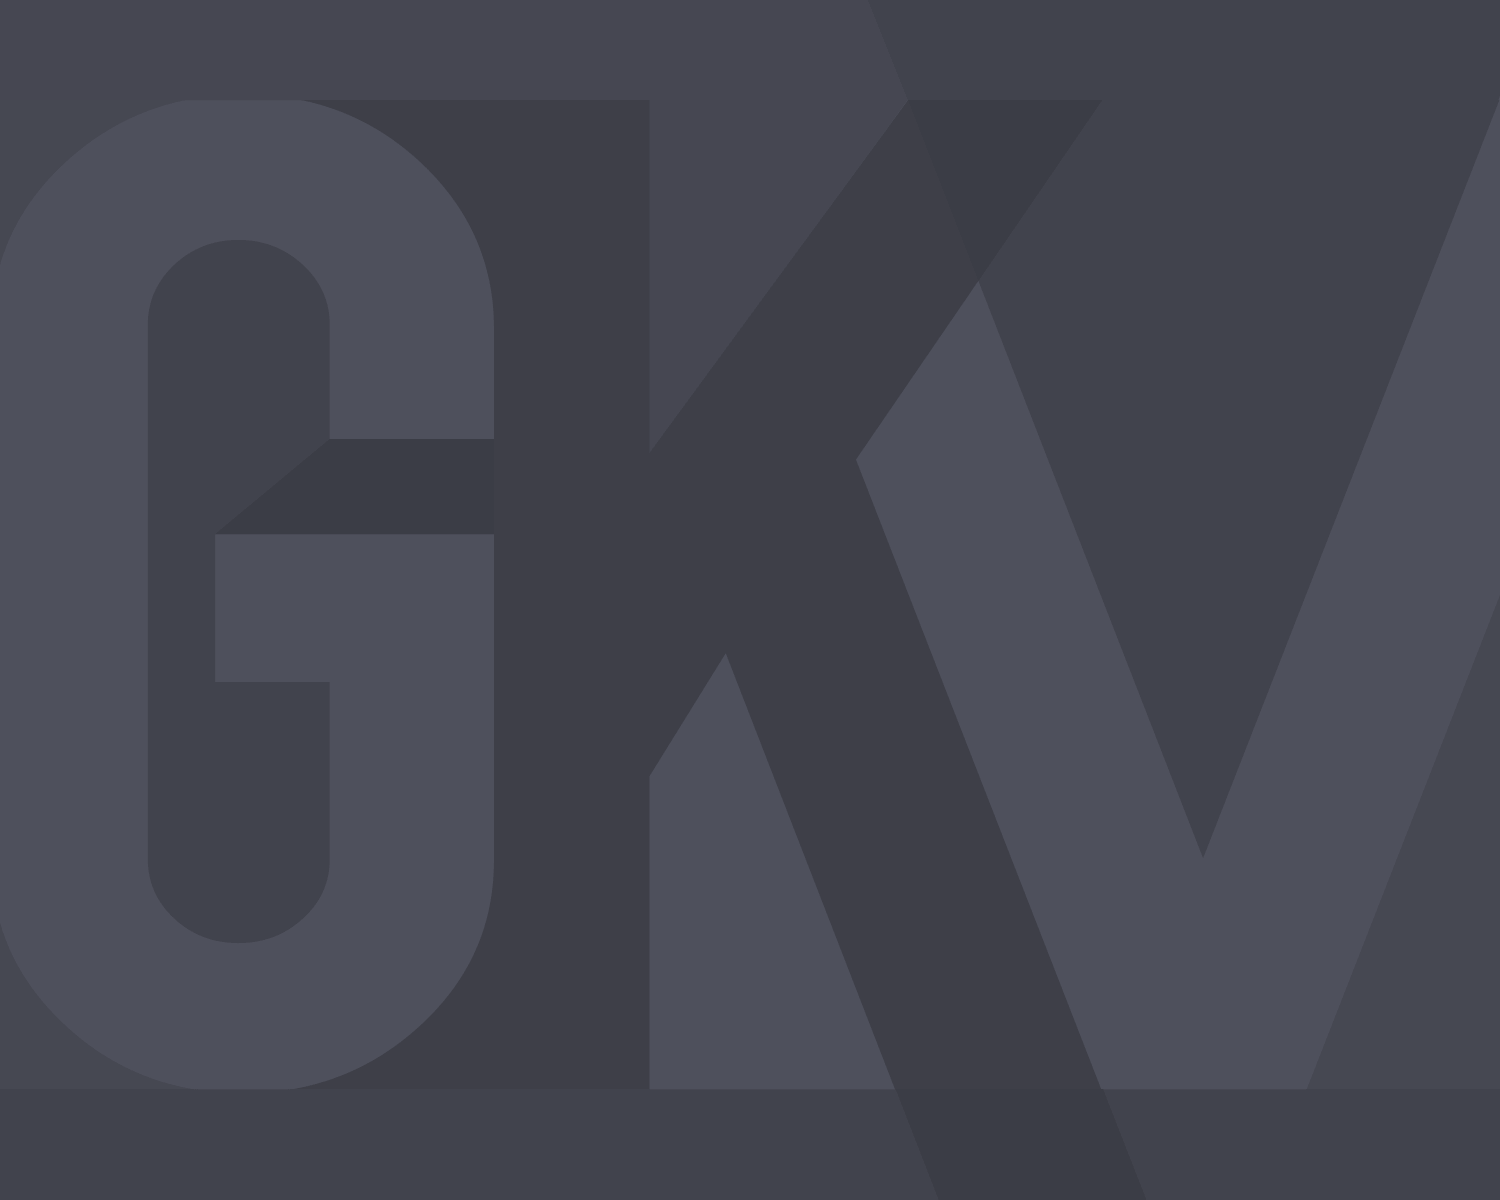 About - GKV